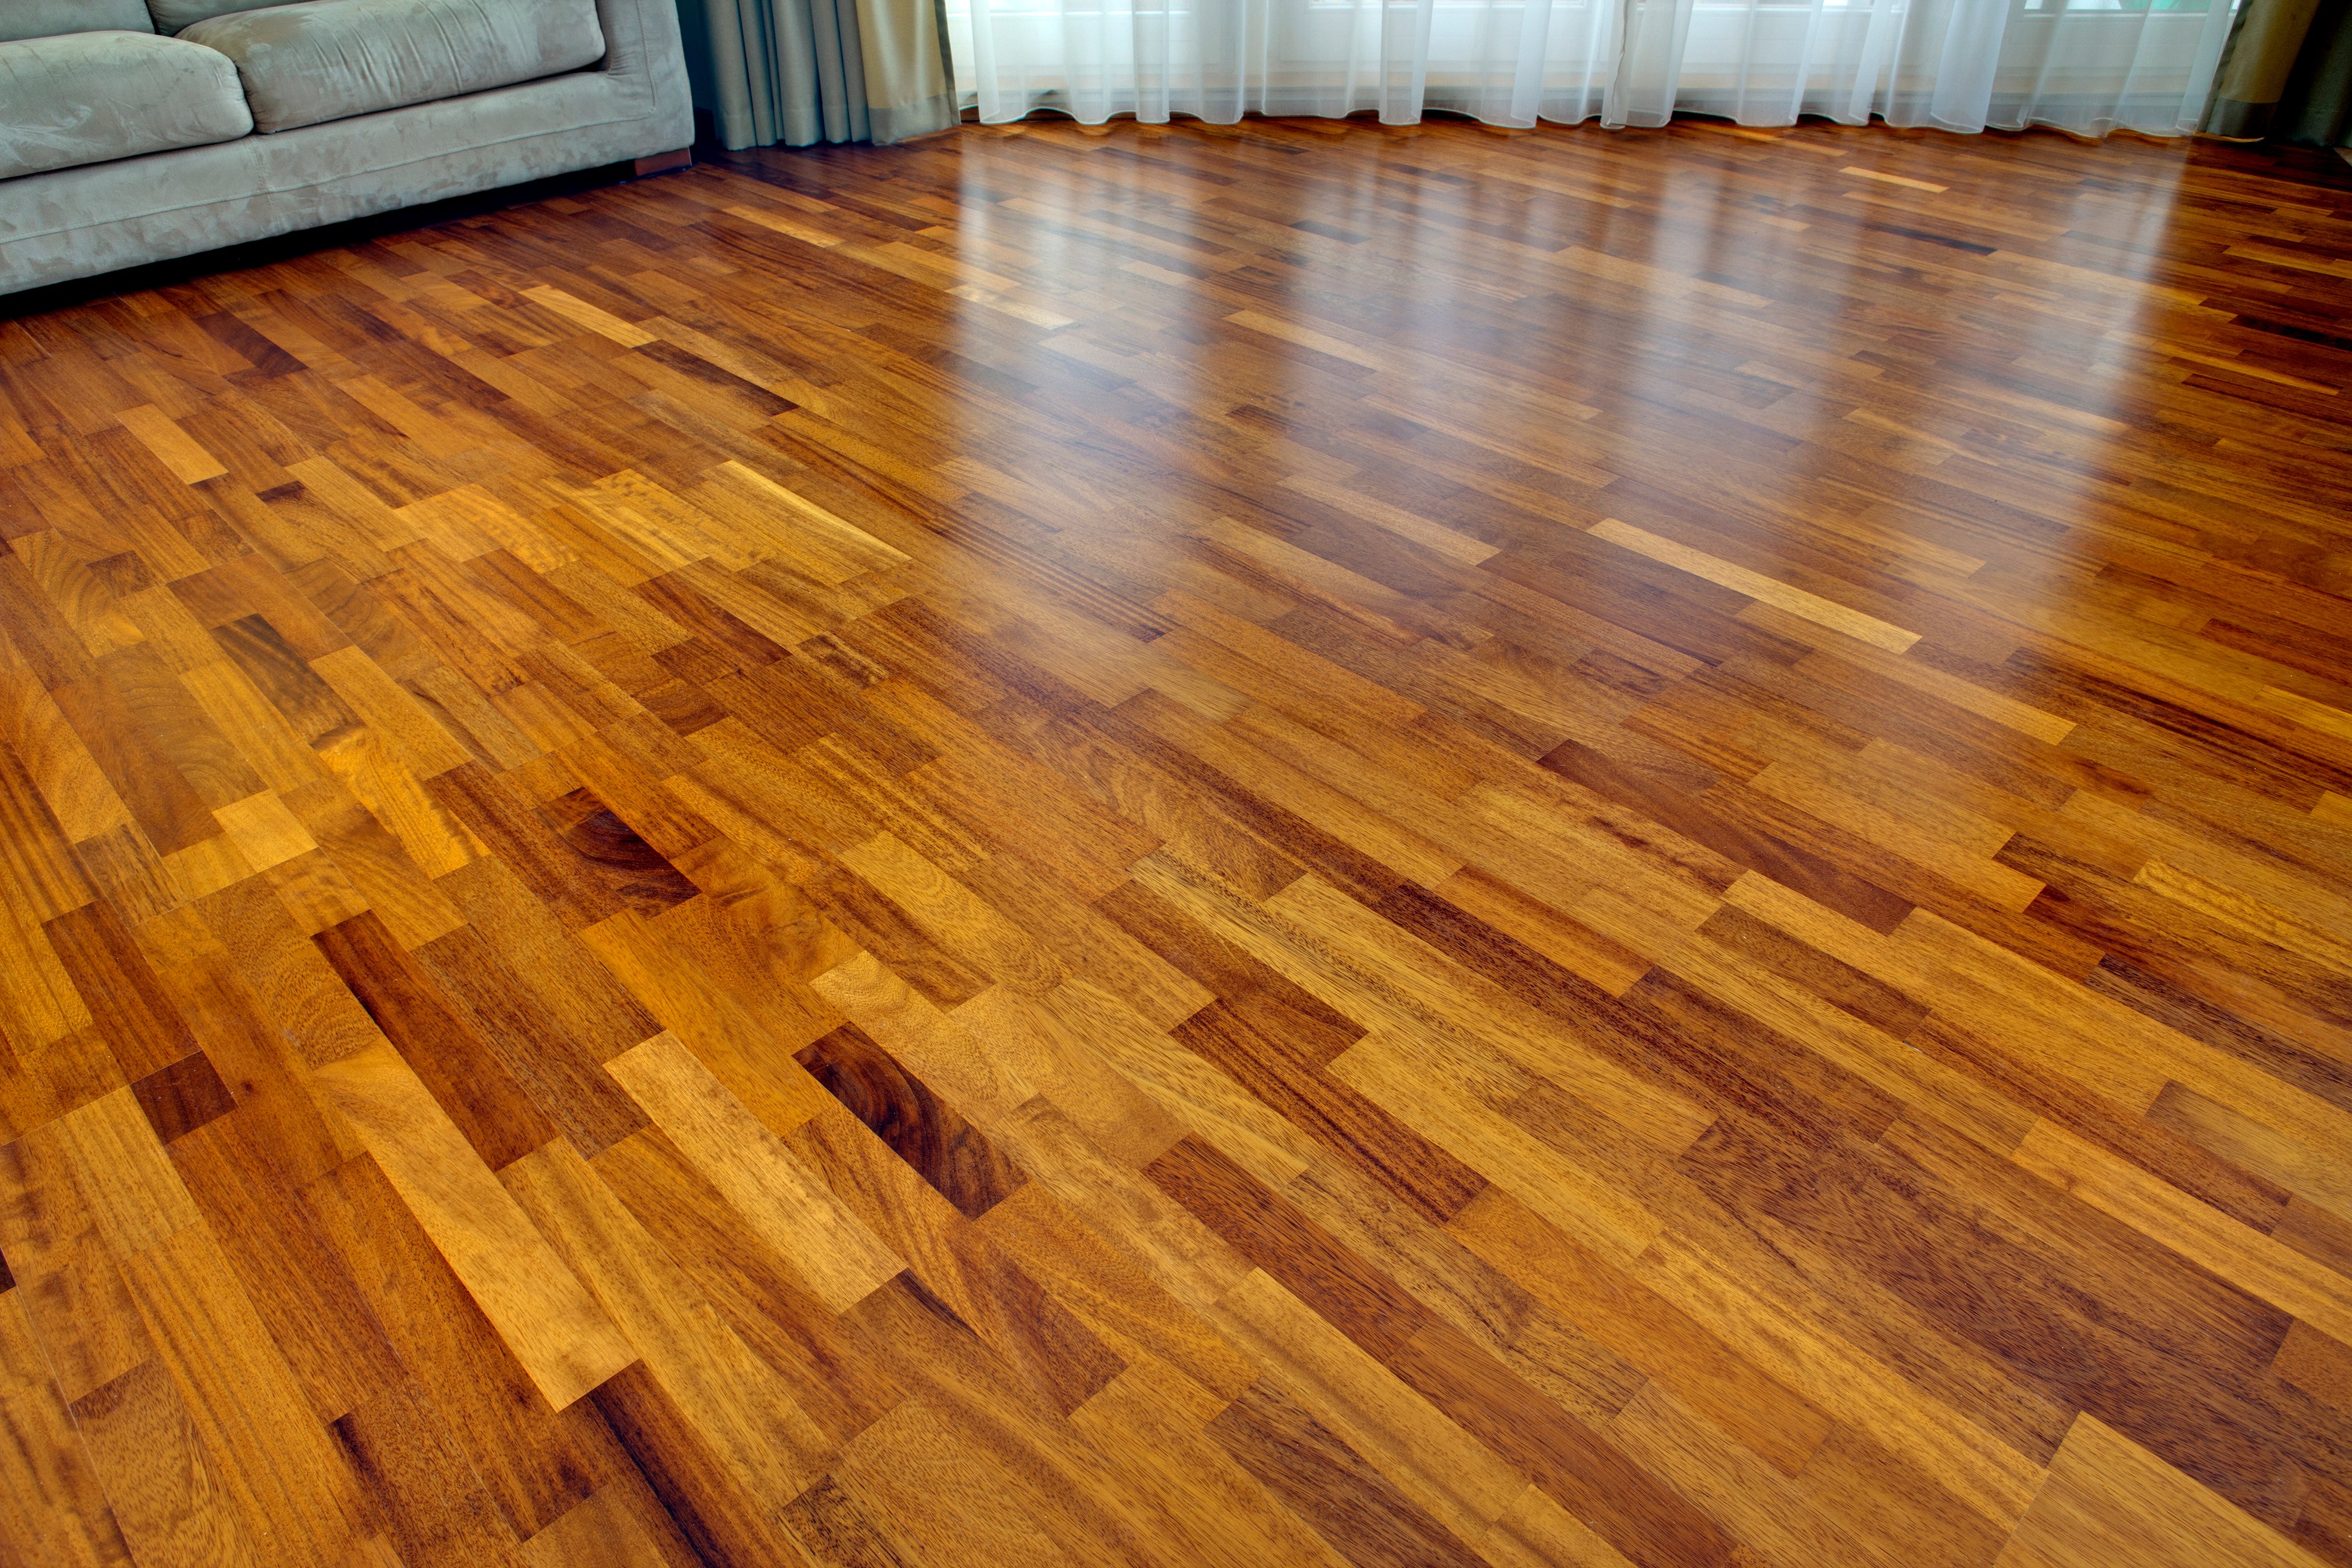 How To Install Hardwood Floors With, Can You Put Radiant Heat Under Existing Hardwood Floors